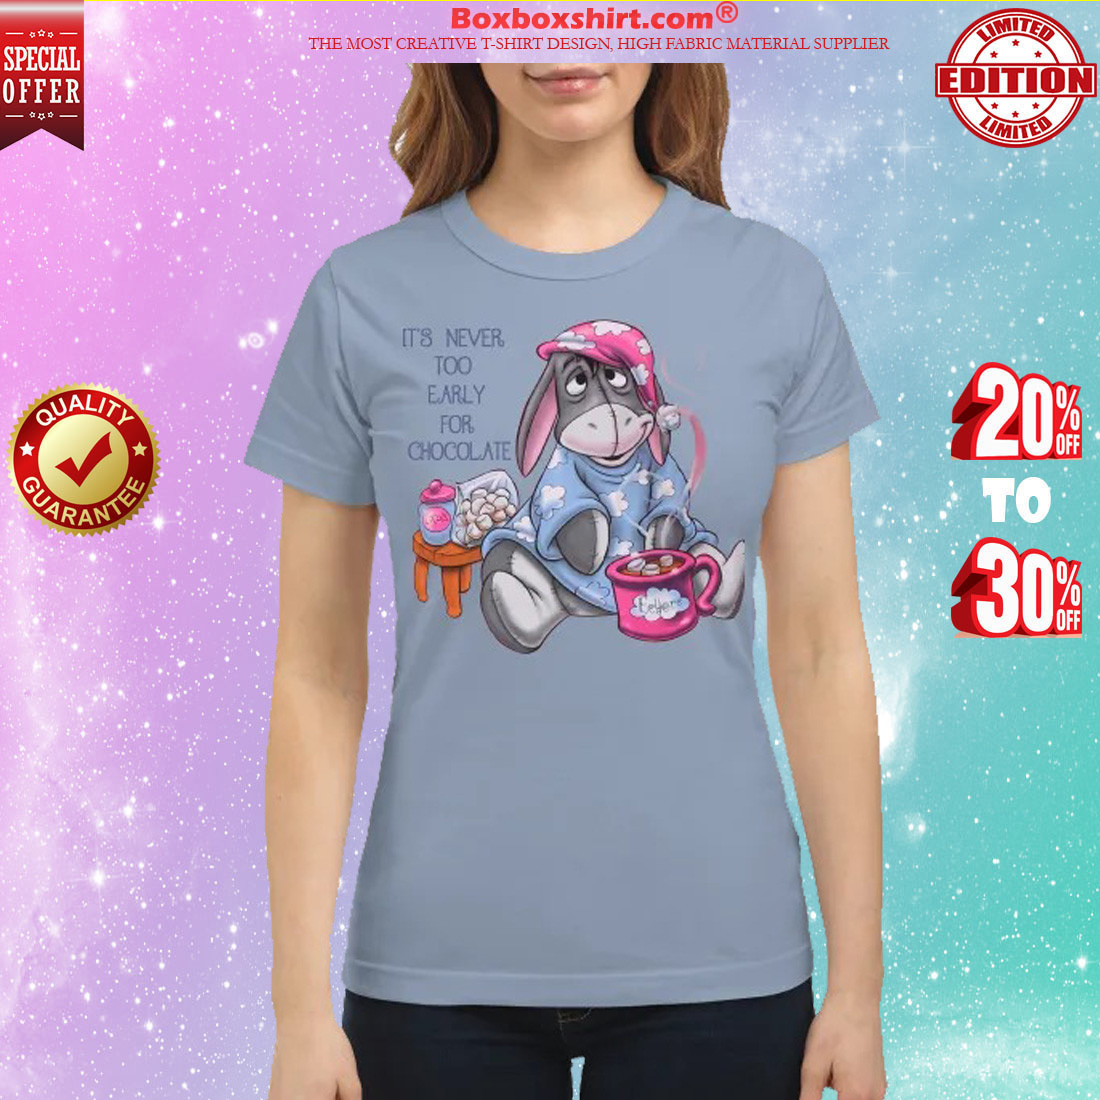 Eeyore it's never too early for chocolate shirt